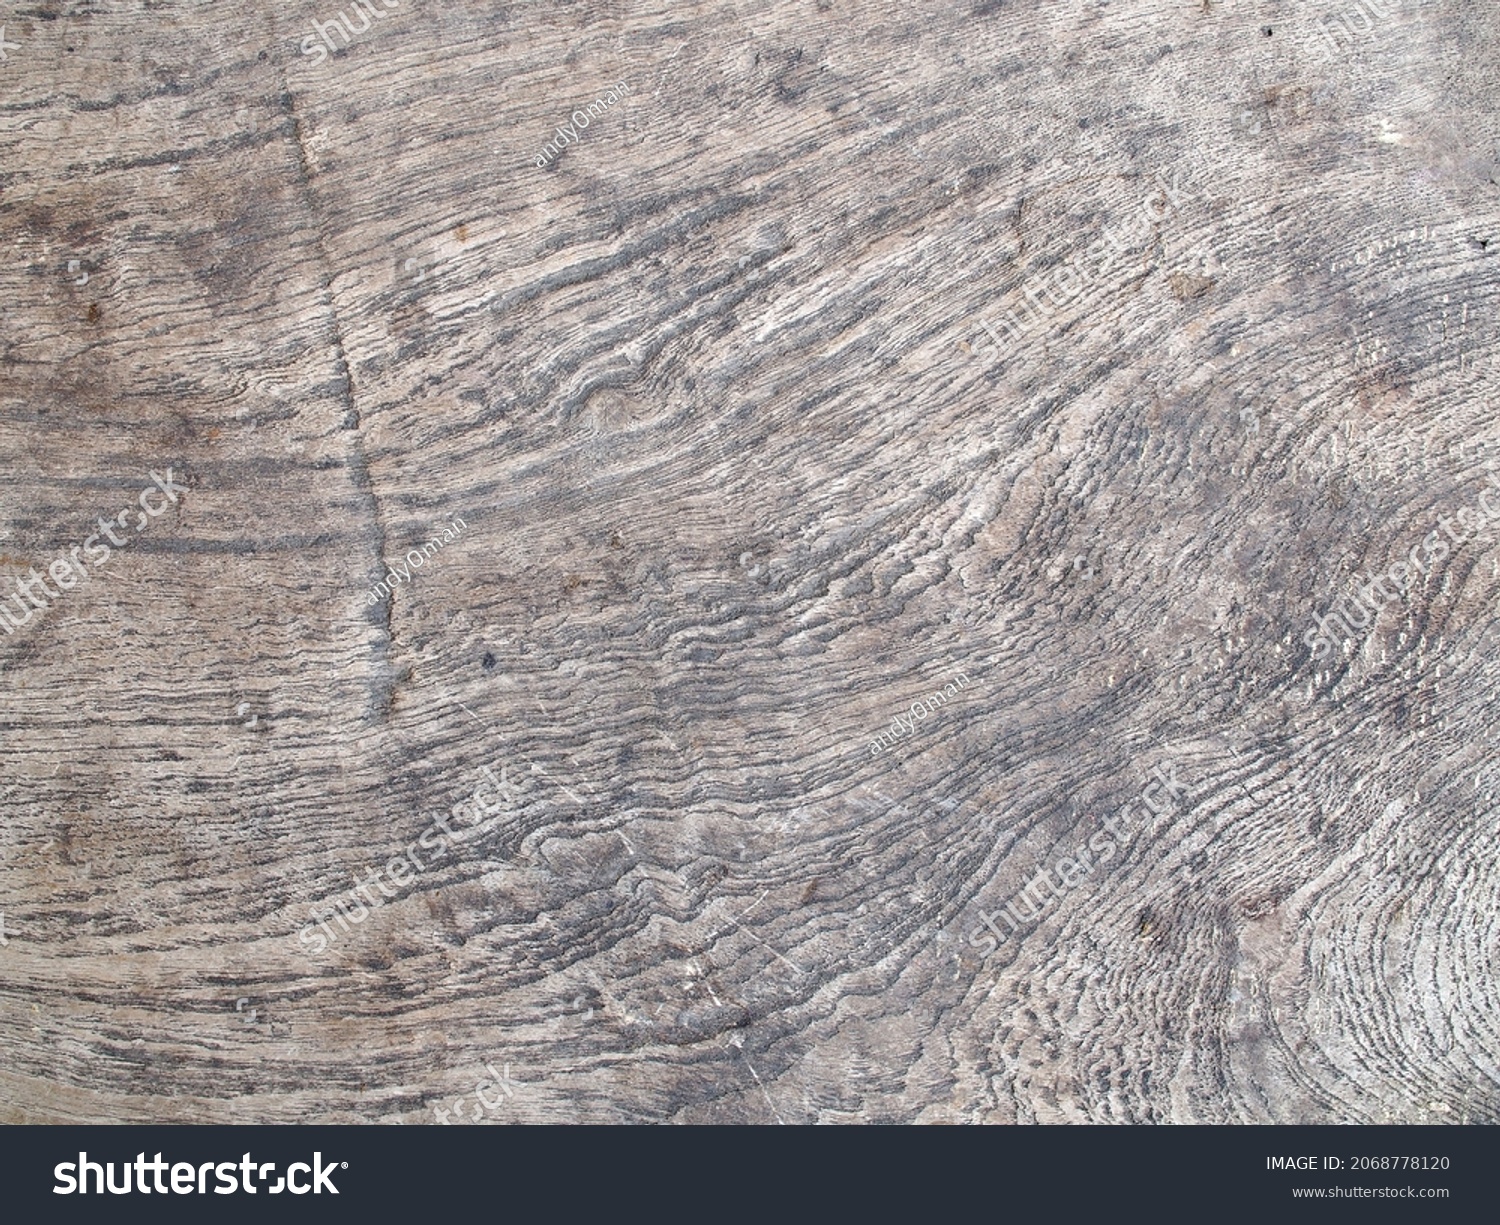 top view of obsolete rustic wooden desk, close-up rough surface of grunge hardwood with ripple tracery for background #2068778120